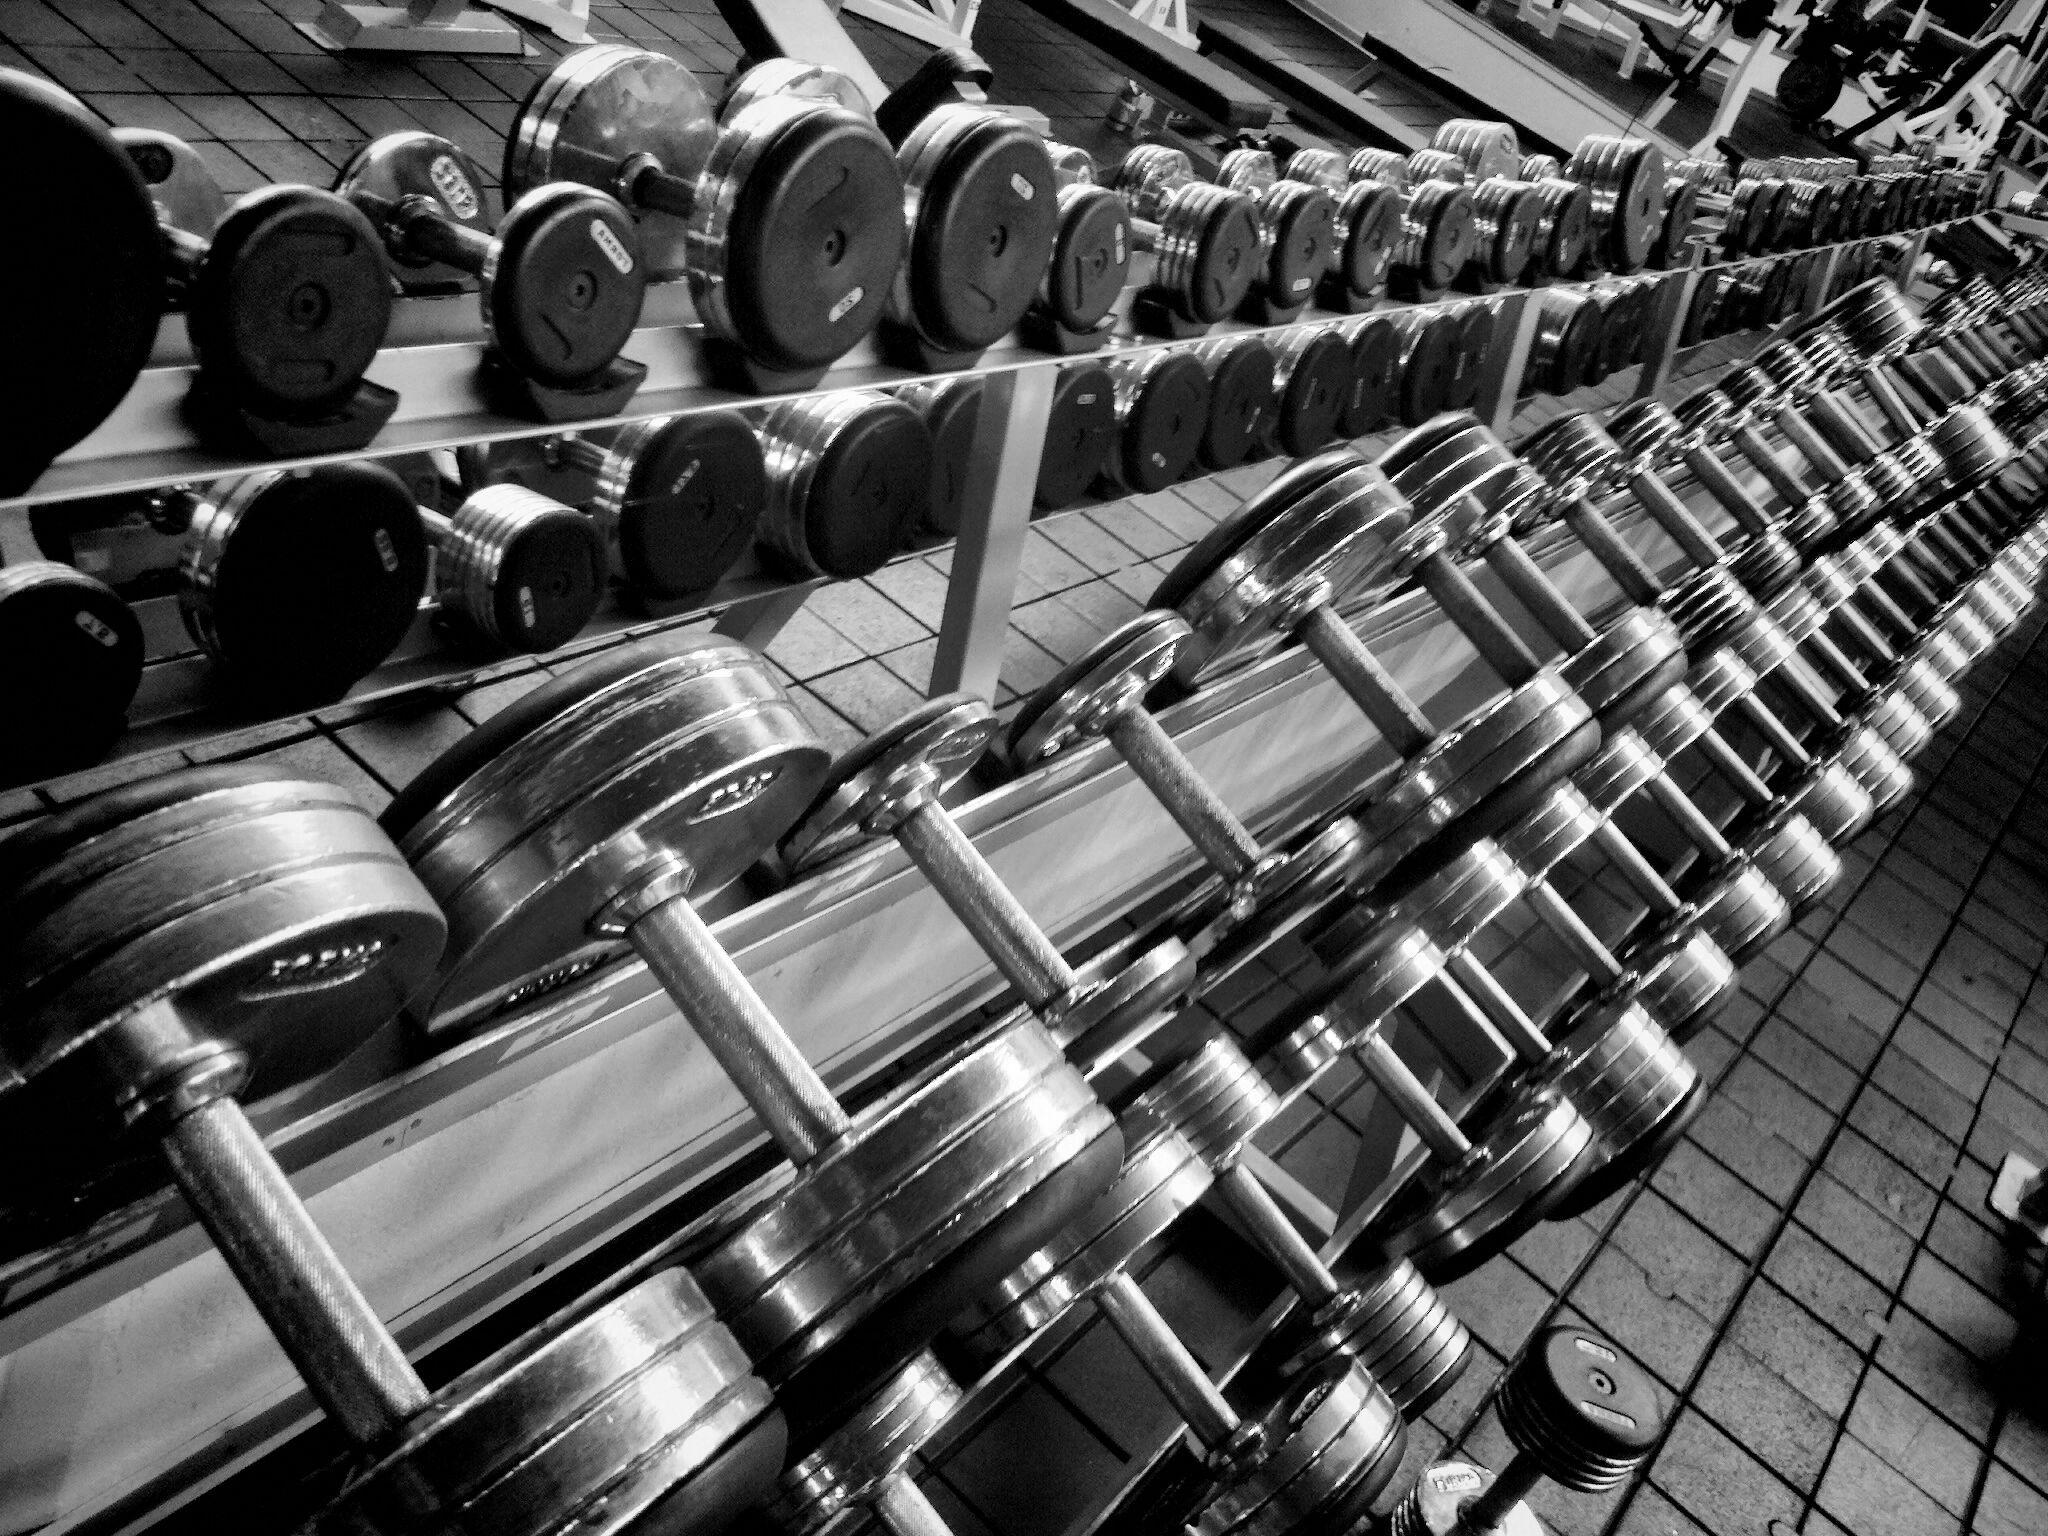 303000 Dumbbell Stock Photos Pictures  RoyaltyFree Images  iStock   Dumbell icon Dumbells isolated Dumbbell rack